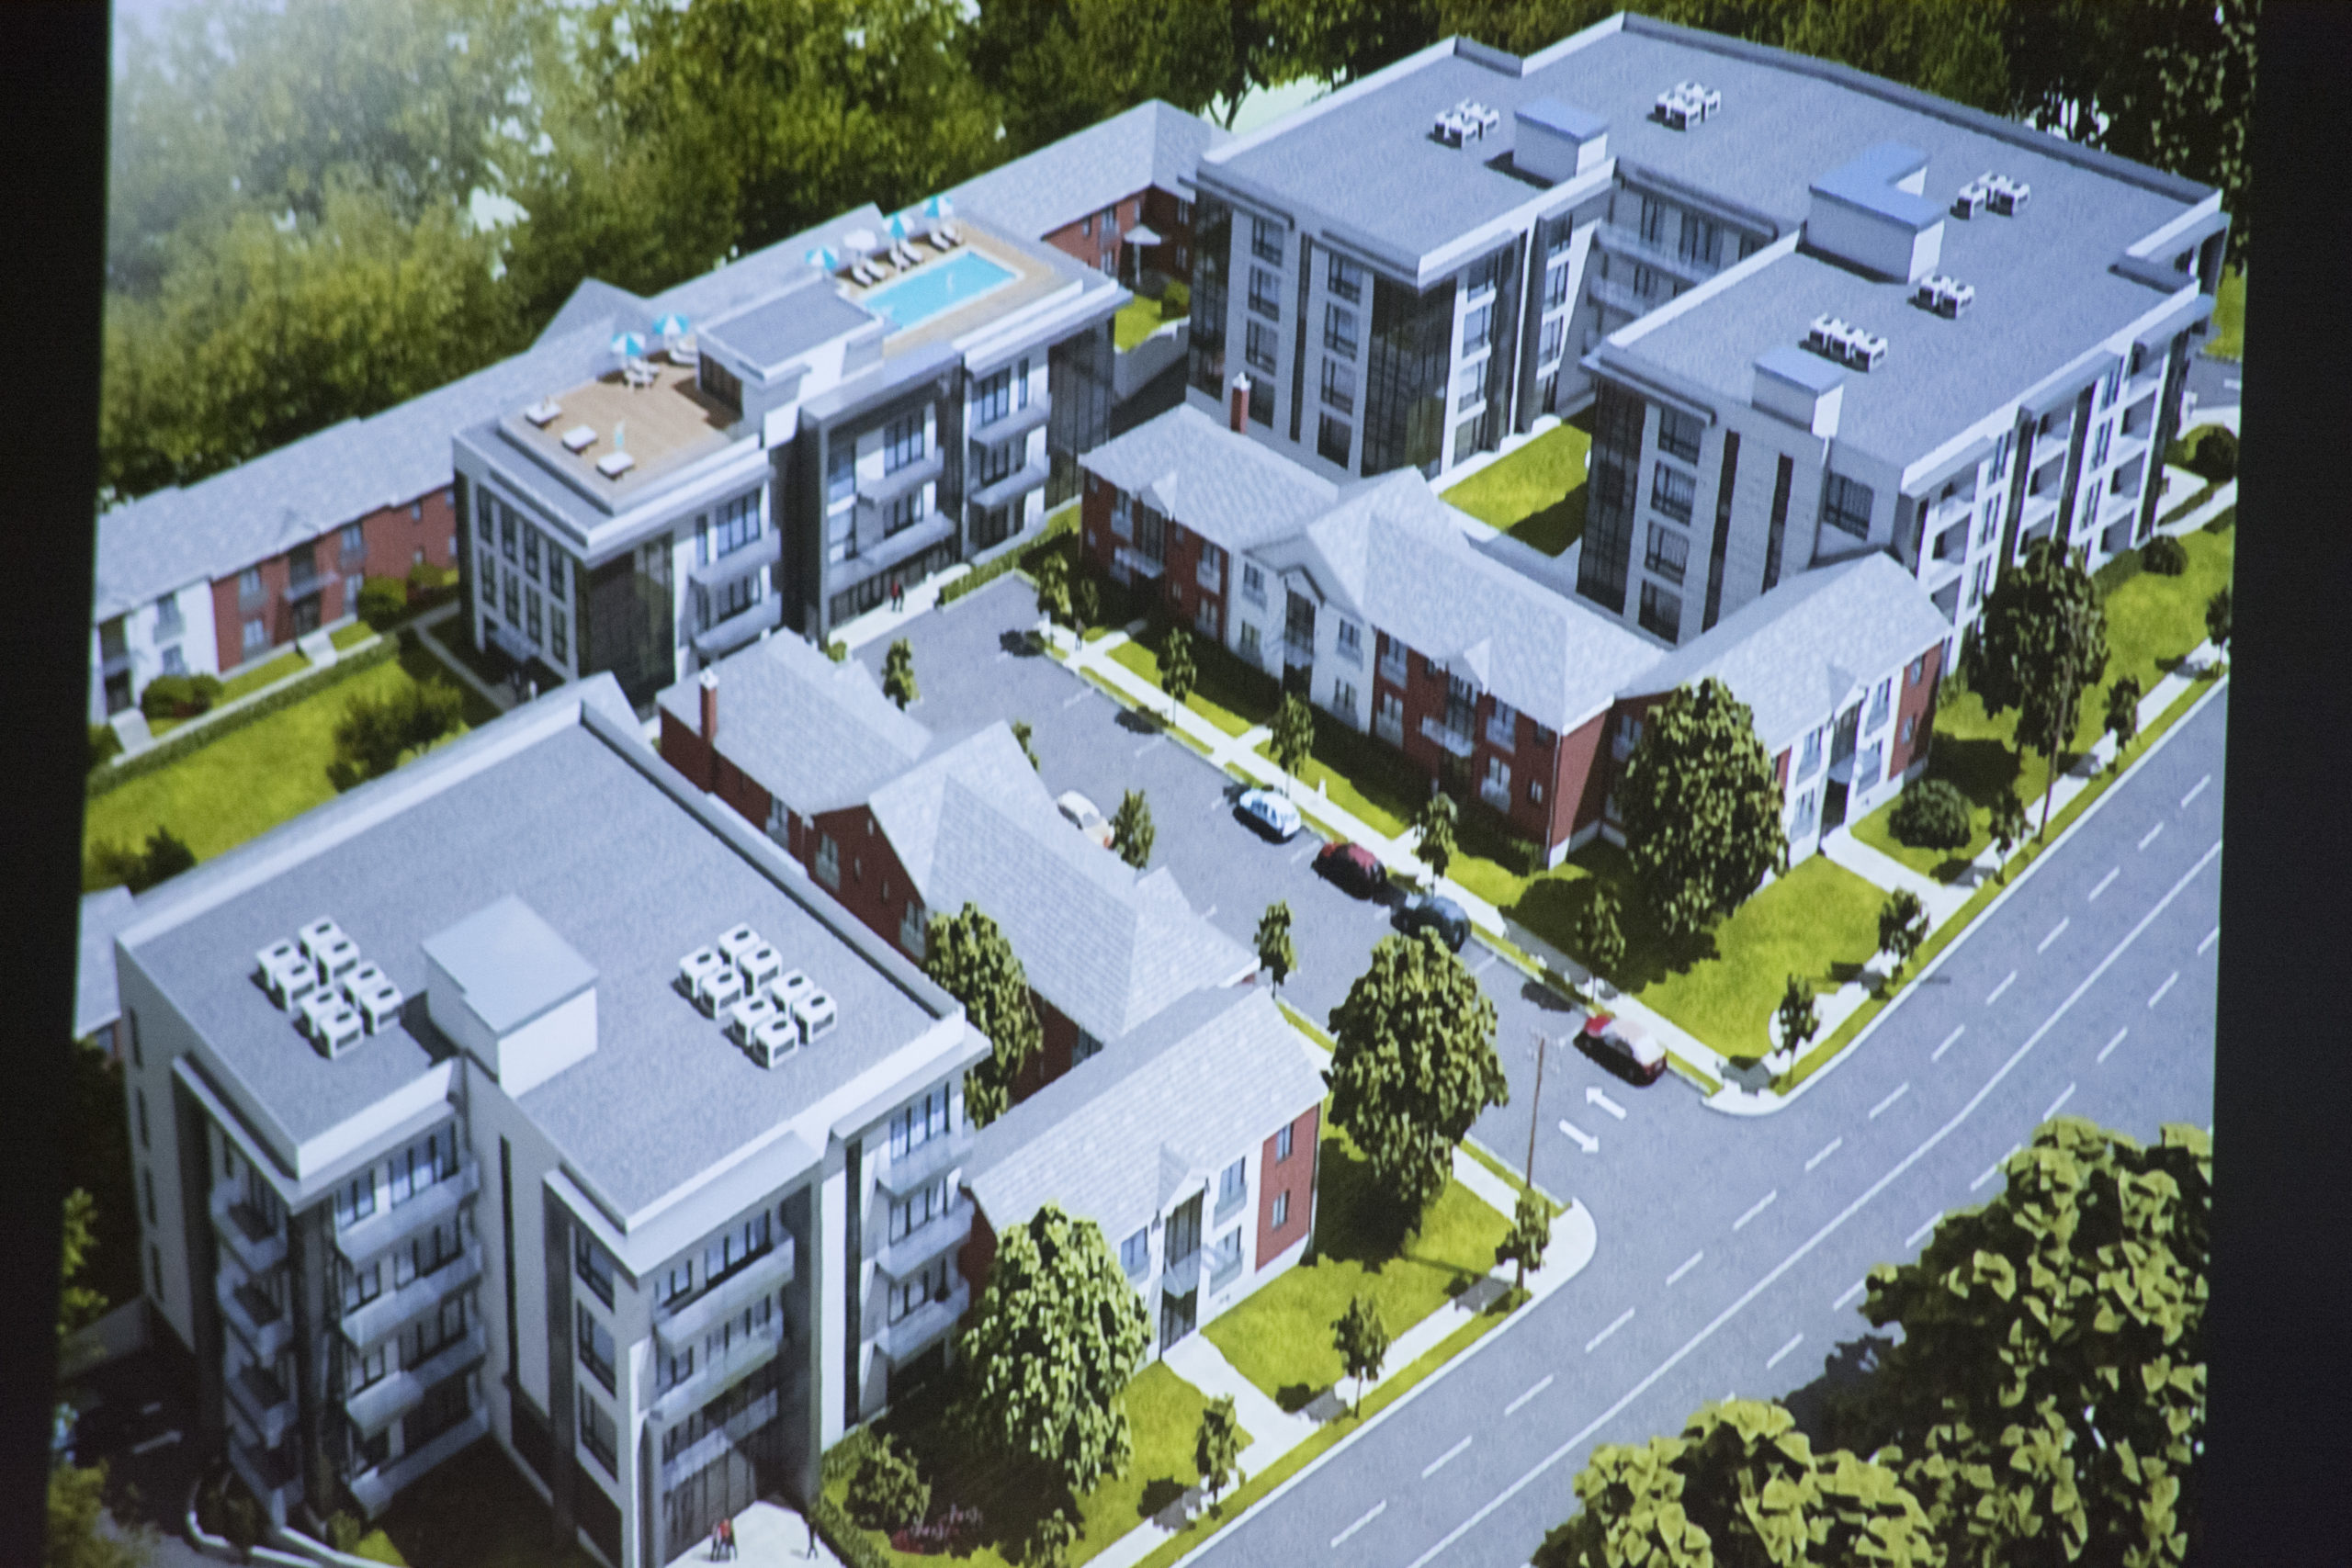 A digital rendering of the proposed Millbrook Apartments changes shows the addition of new buildings and a change to building exteriors. (Photo from Newman Design Architects)